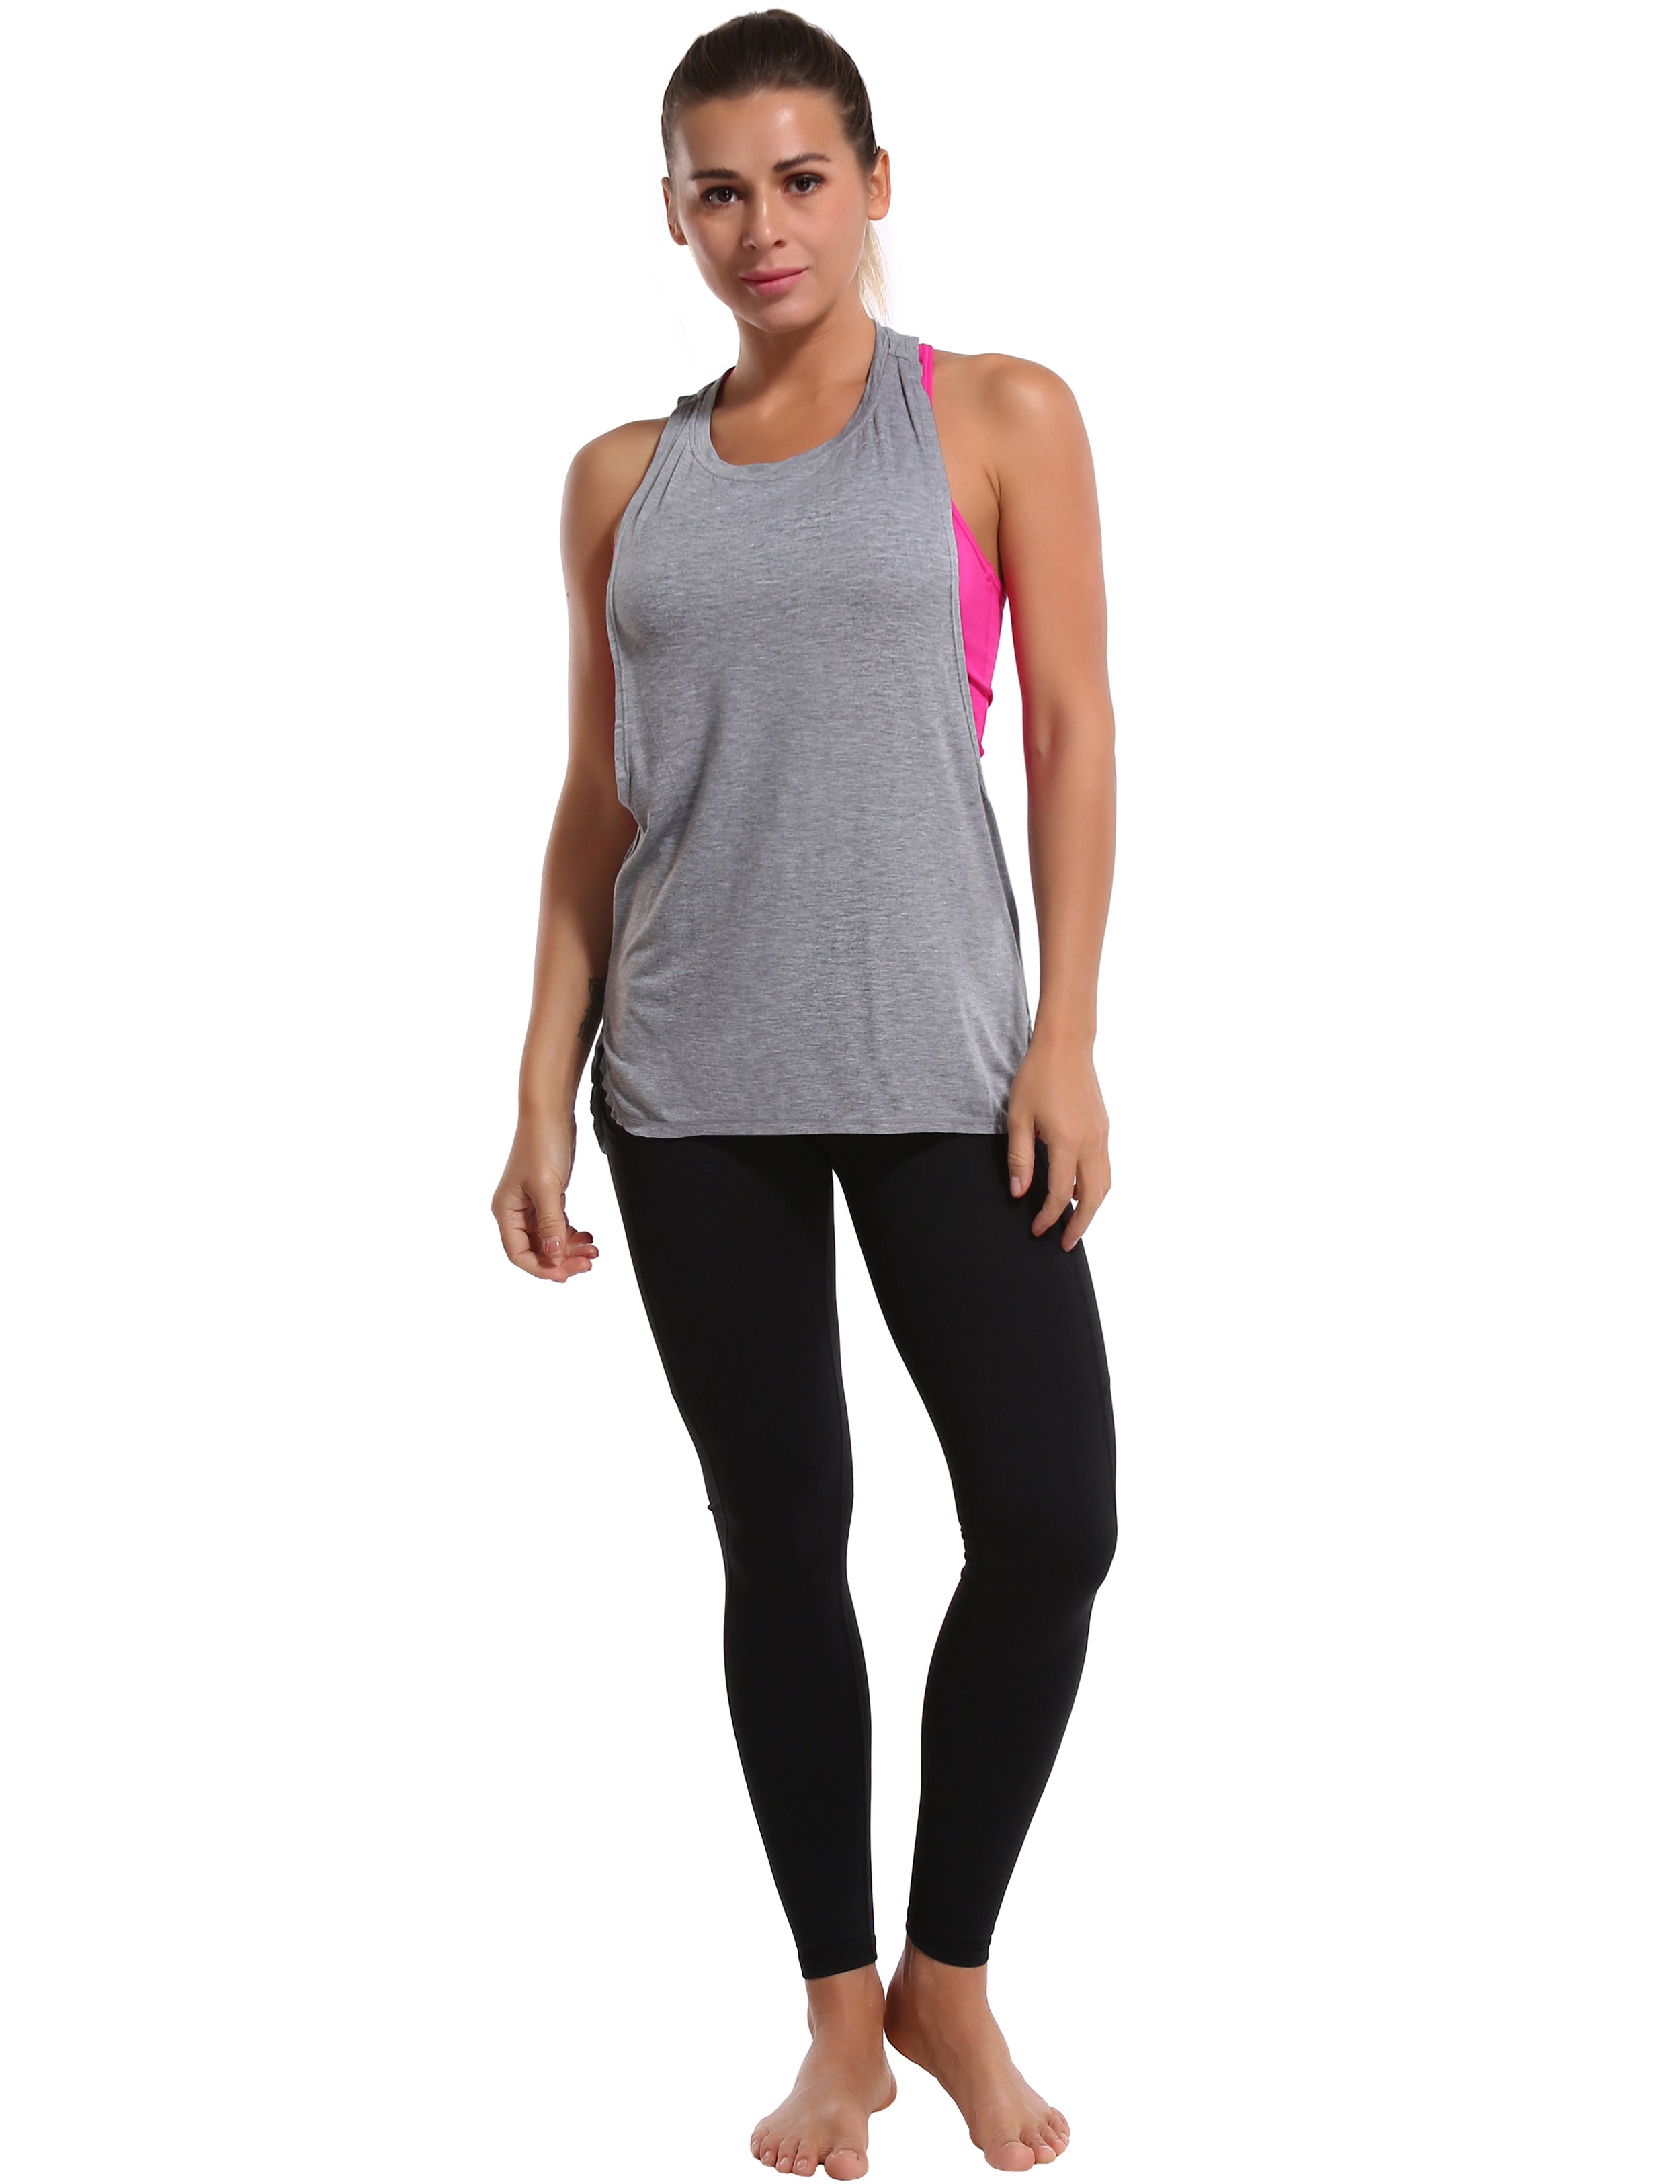 Low Cut Loose Fit Tank Top heathergray Designed for On the Move Loose fit 93%Modal/7%Spandex Four-way stretch Naturally breathable Super-Soft, Modal Fabric